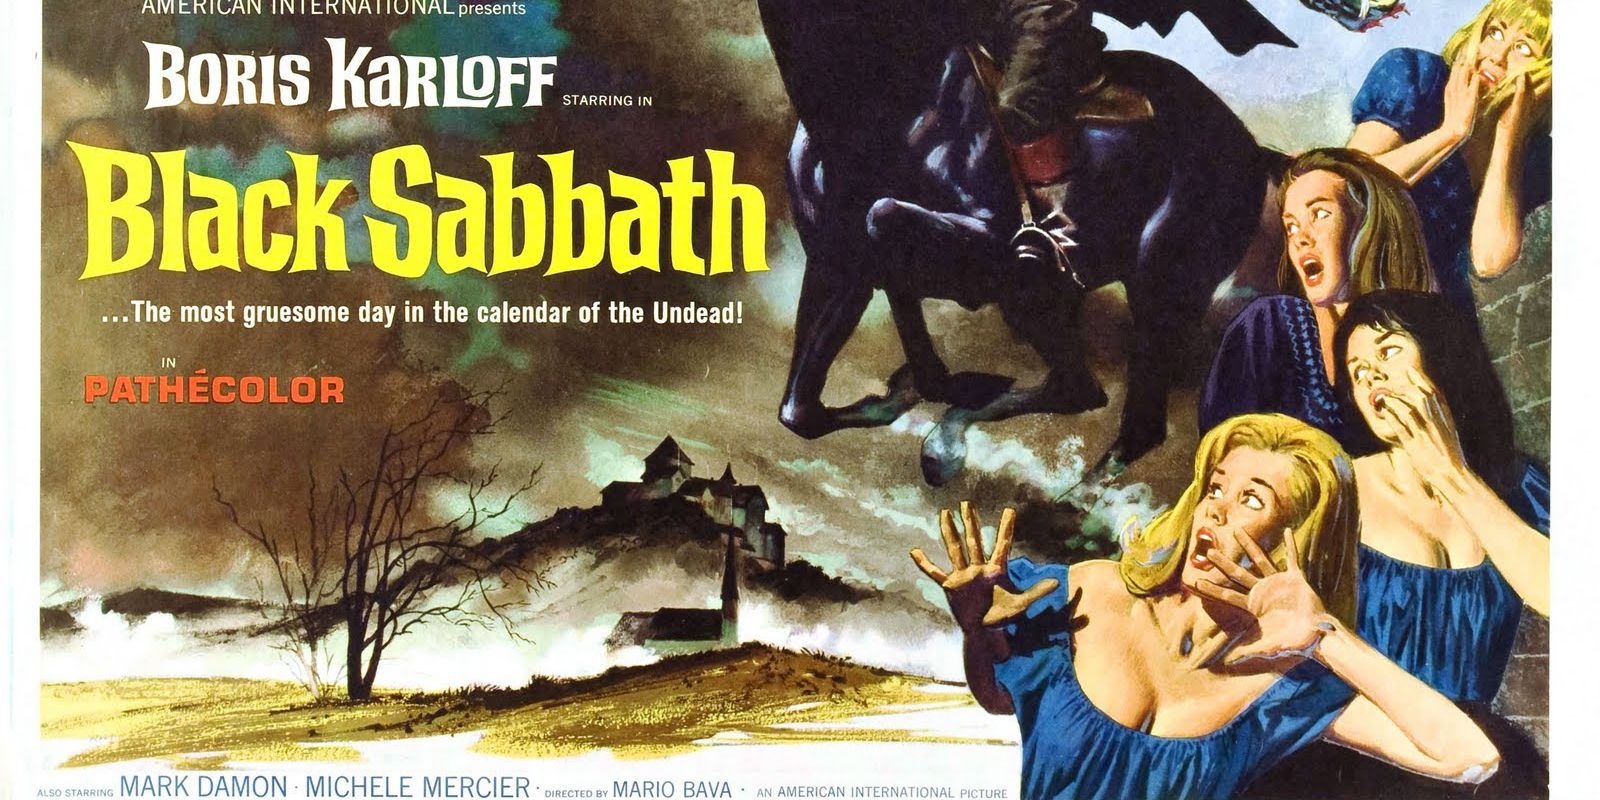 A Black Sabbath movie poster with a woman screaming.